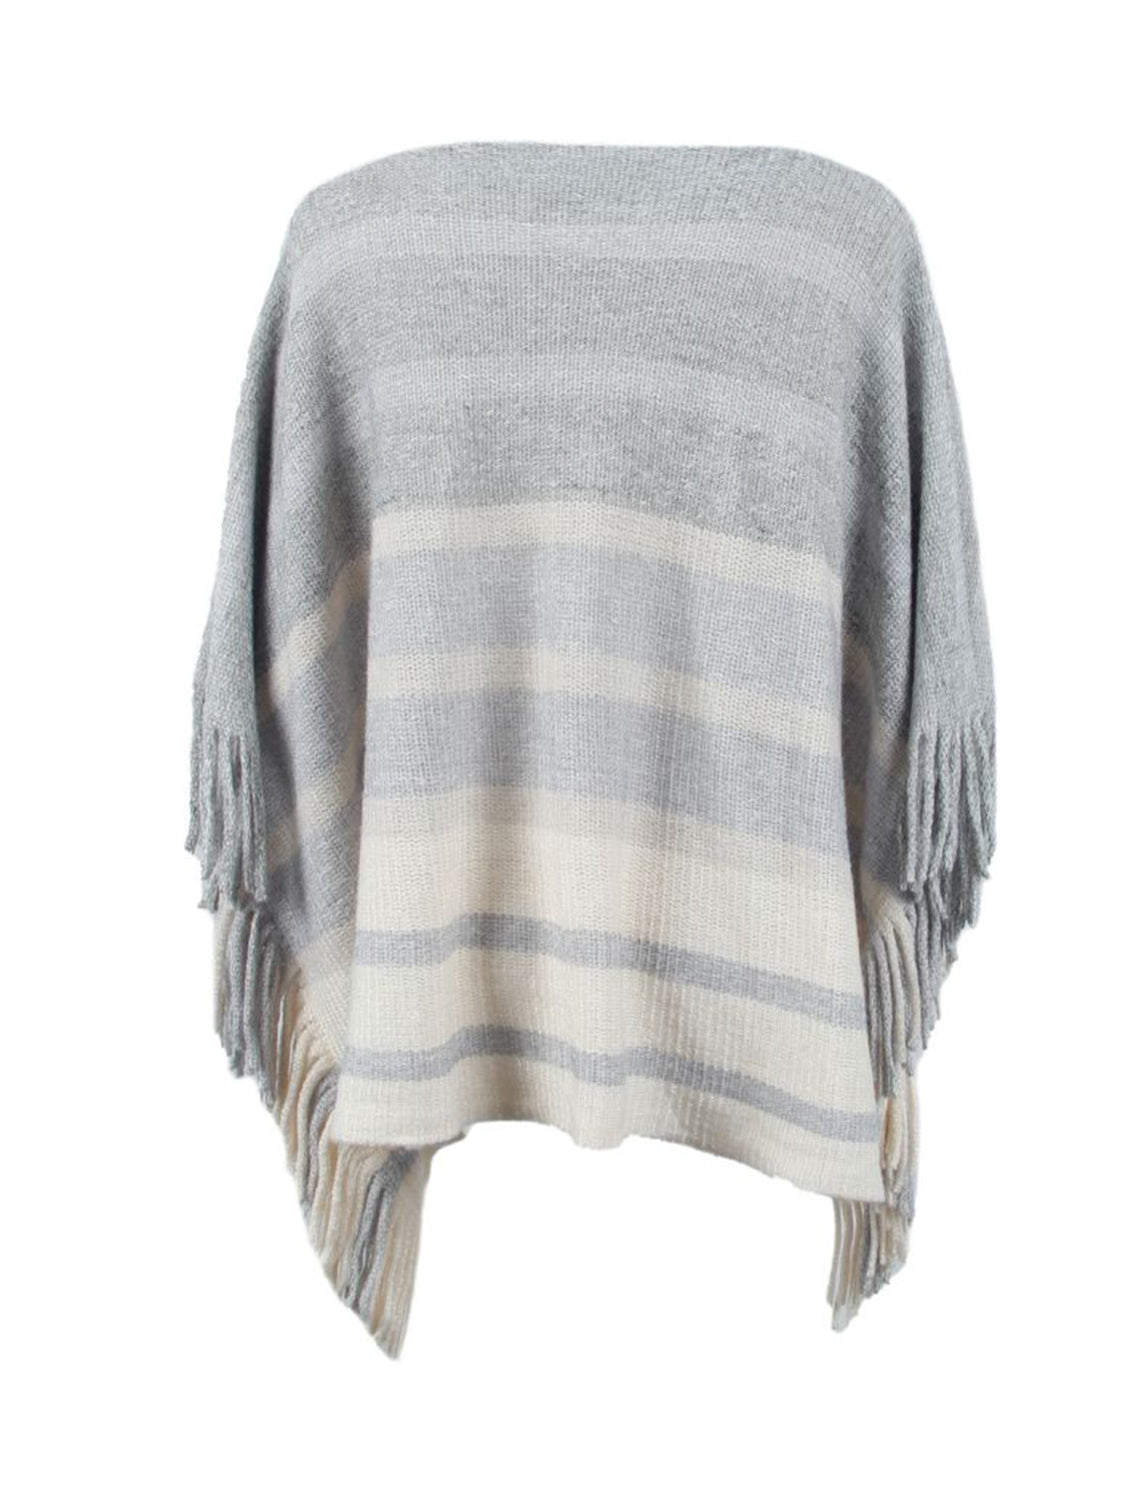 Striped Boat Neck Poncho with Fringes